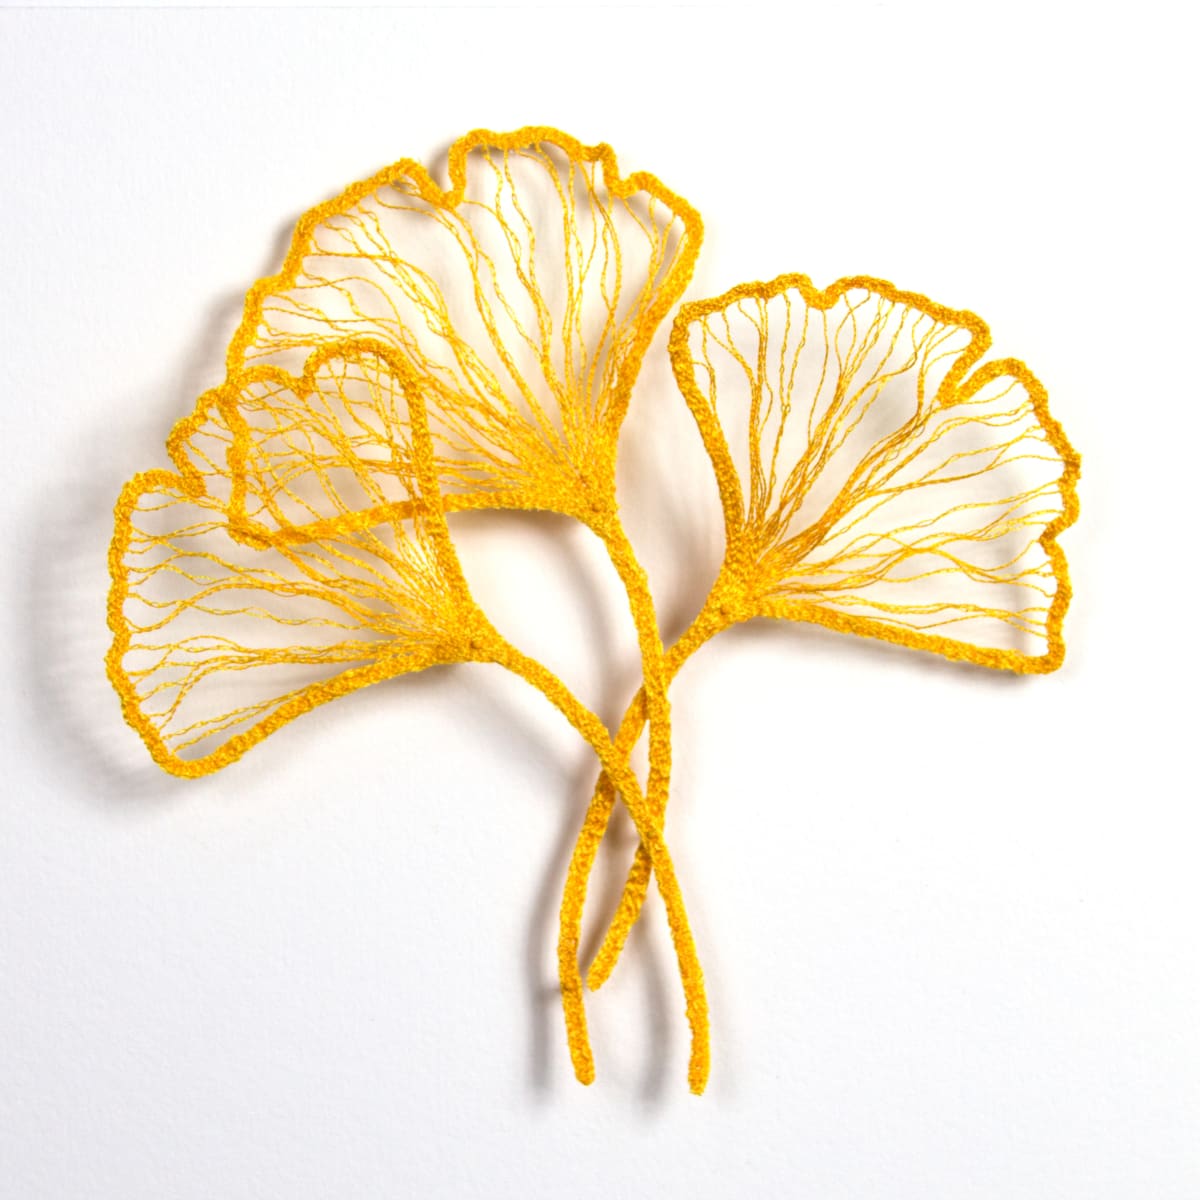 Little Ginkgo study 2 by Meredith Woolnough 